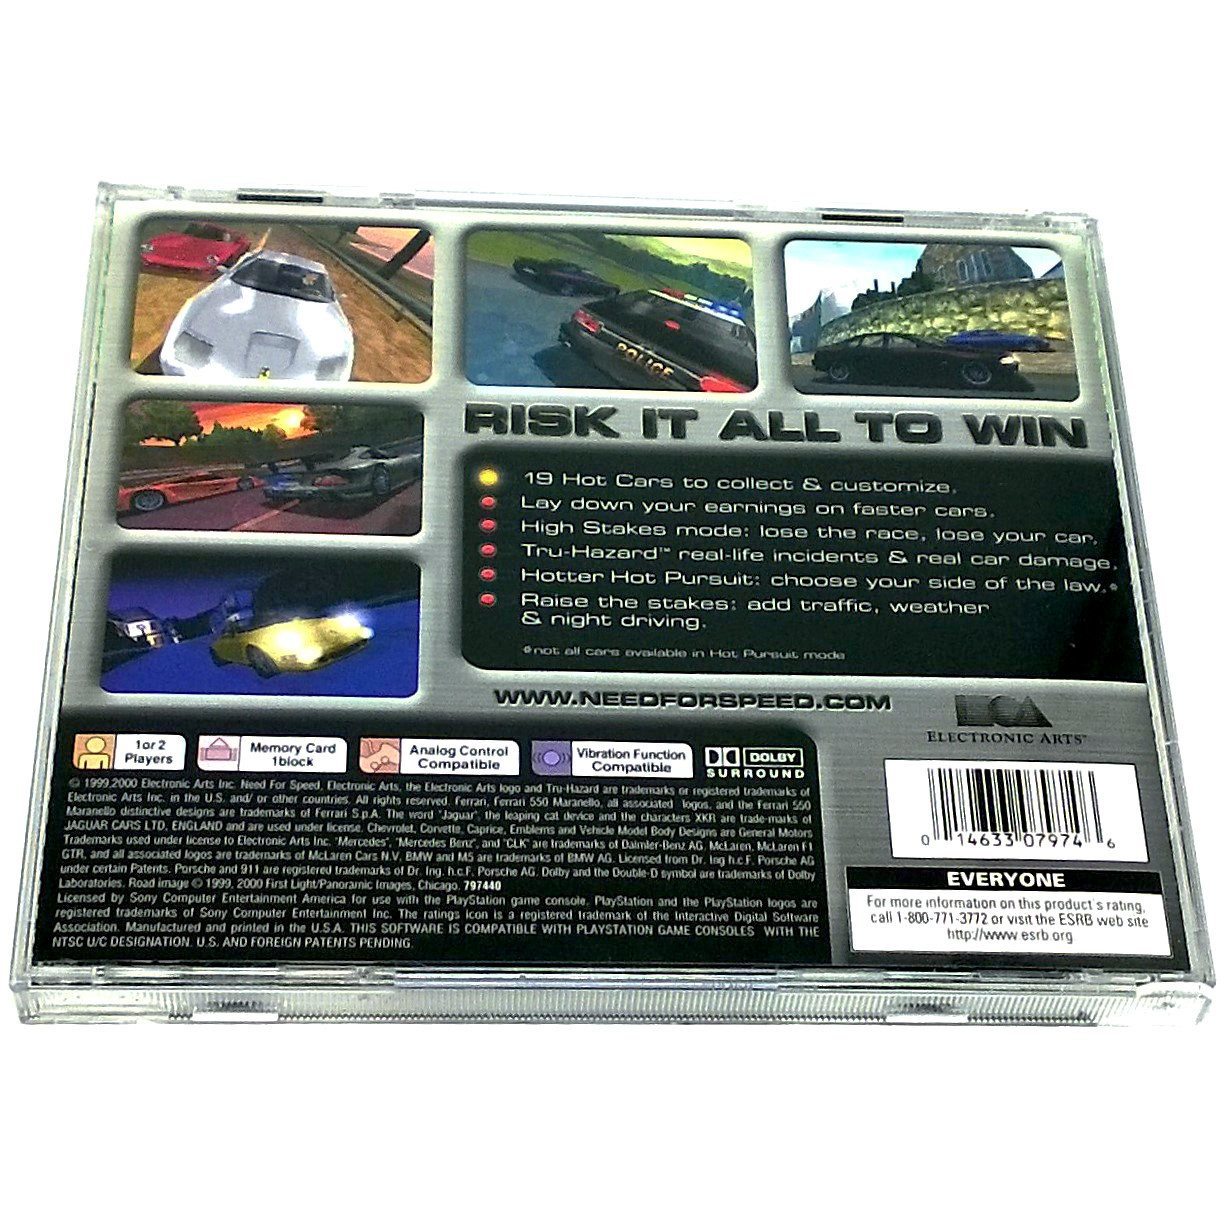 Need for Speed: High Stakes (Greatest Hits edition) for PlayStation - Back of case